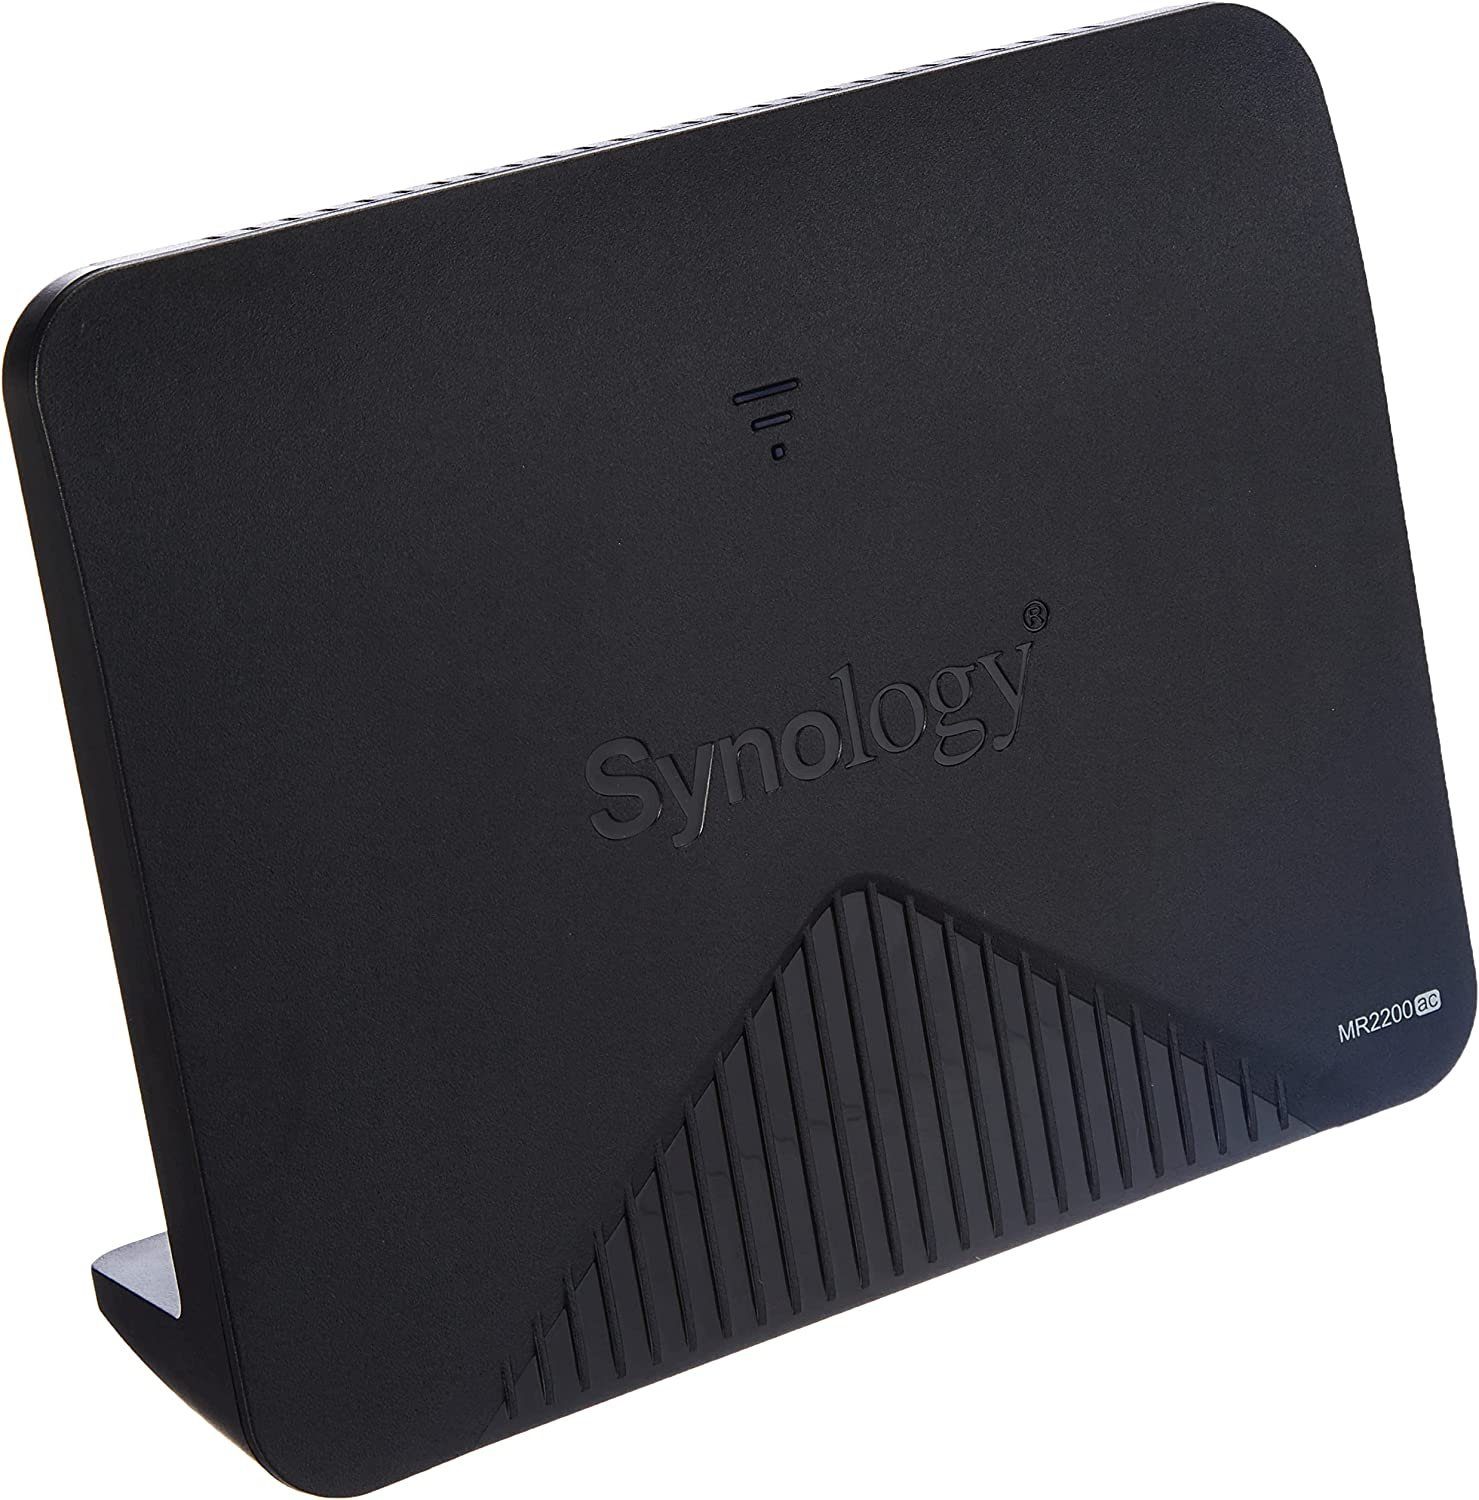 MR2200AC Mesh WLAN-Router Synology